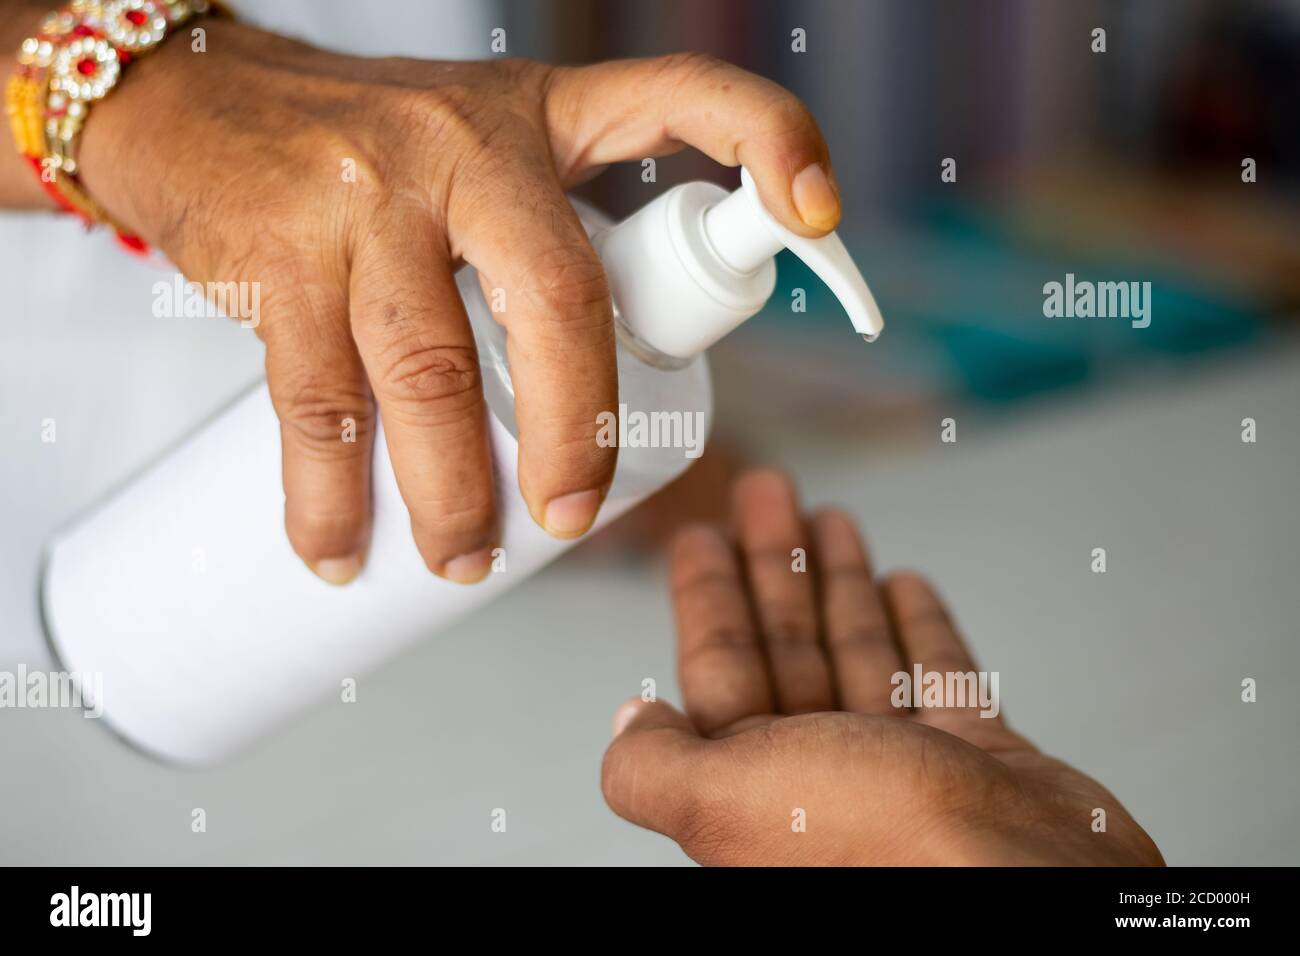 Close up of Shopkeeper Hands giving sanitizer to customer to stop spreading coronavirus or covid-19 infection - concept of safety, hygiene measures at Stock Photo